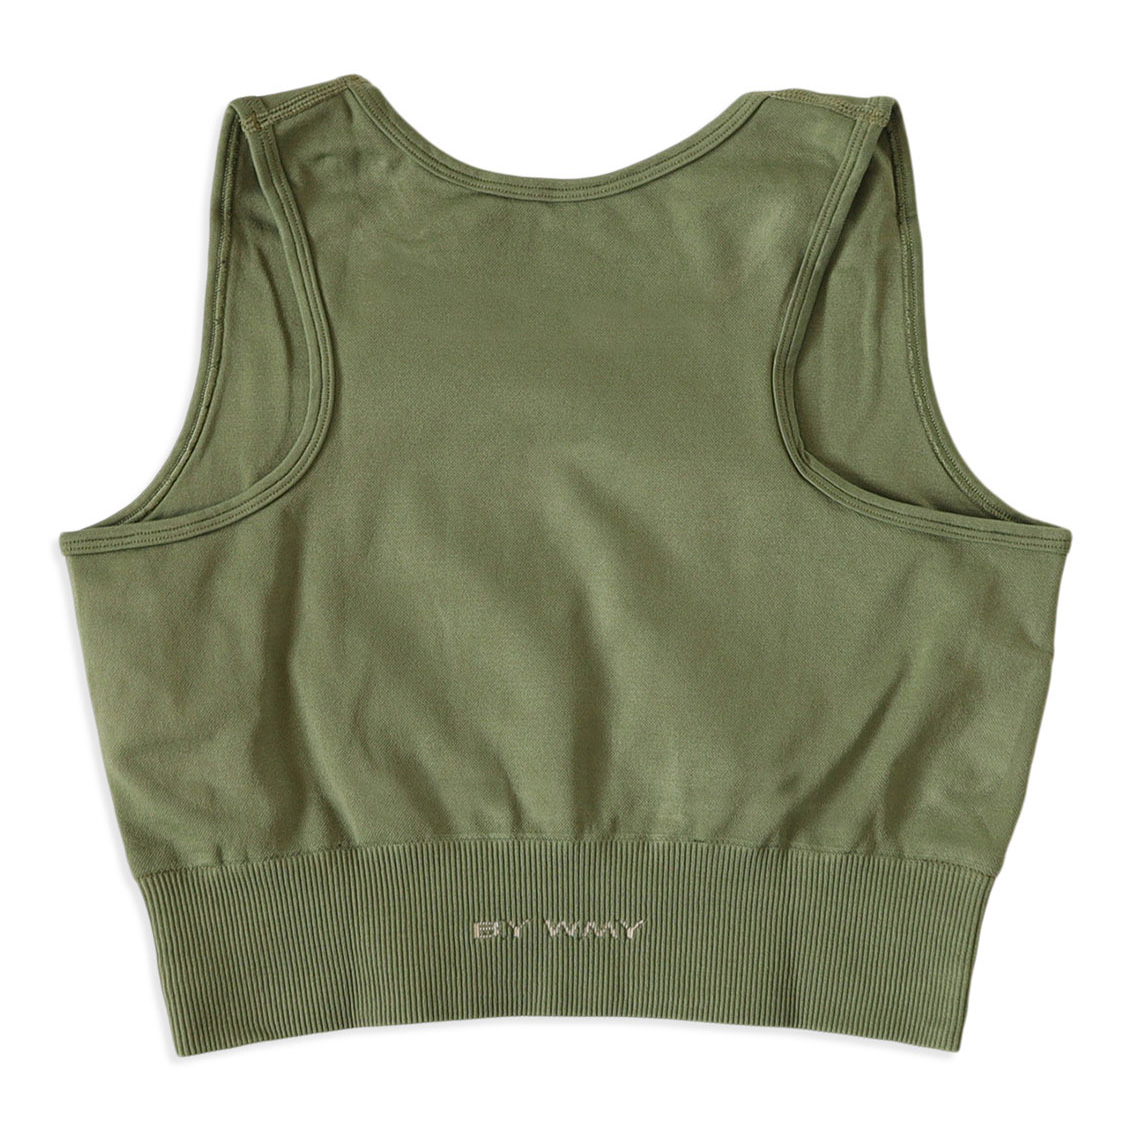 Seamless Sports Bra, in color green.